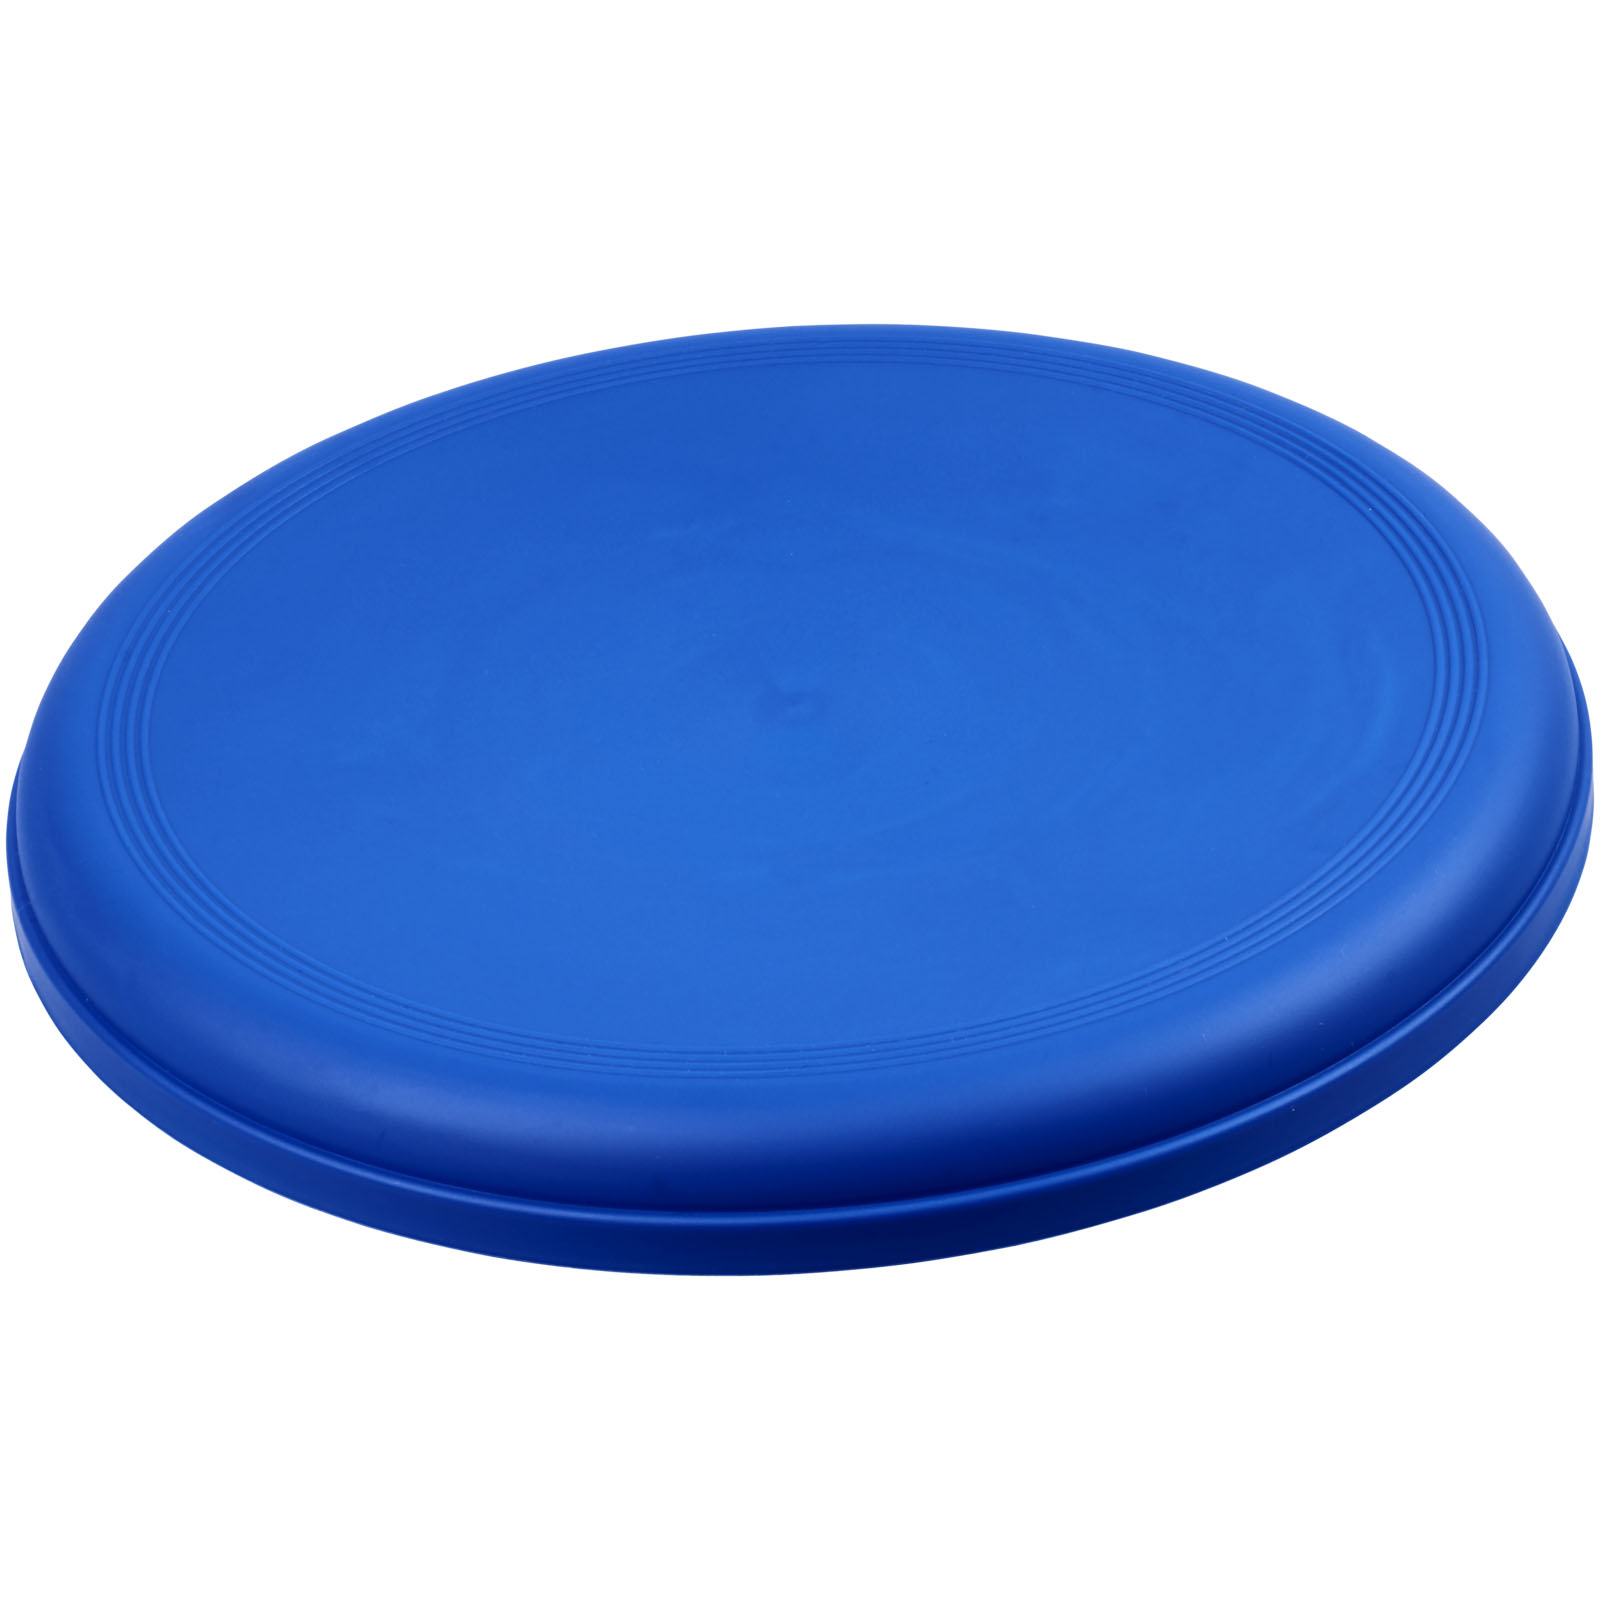 Outdoor Games - Max plastic dog frisbee